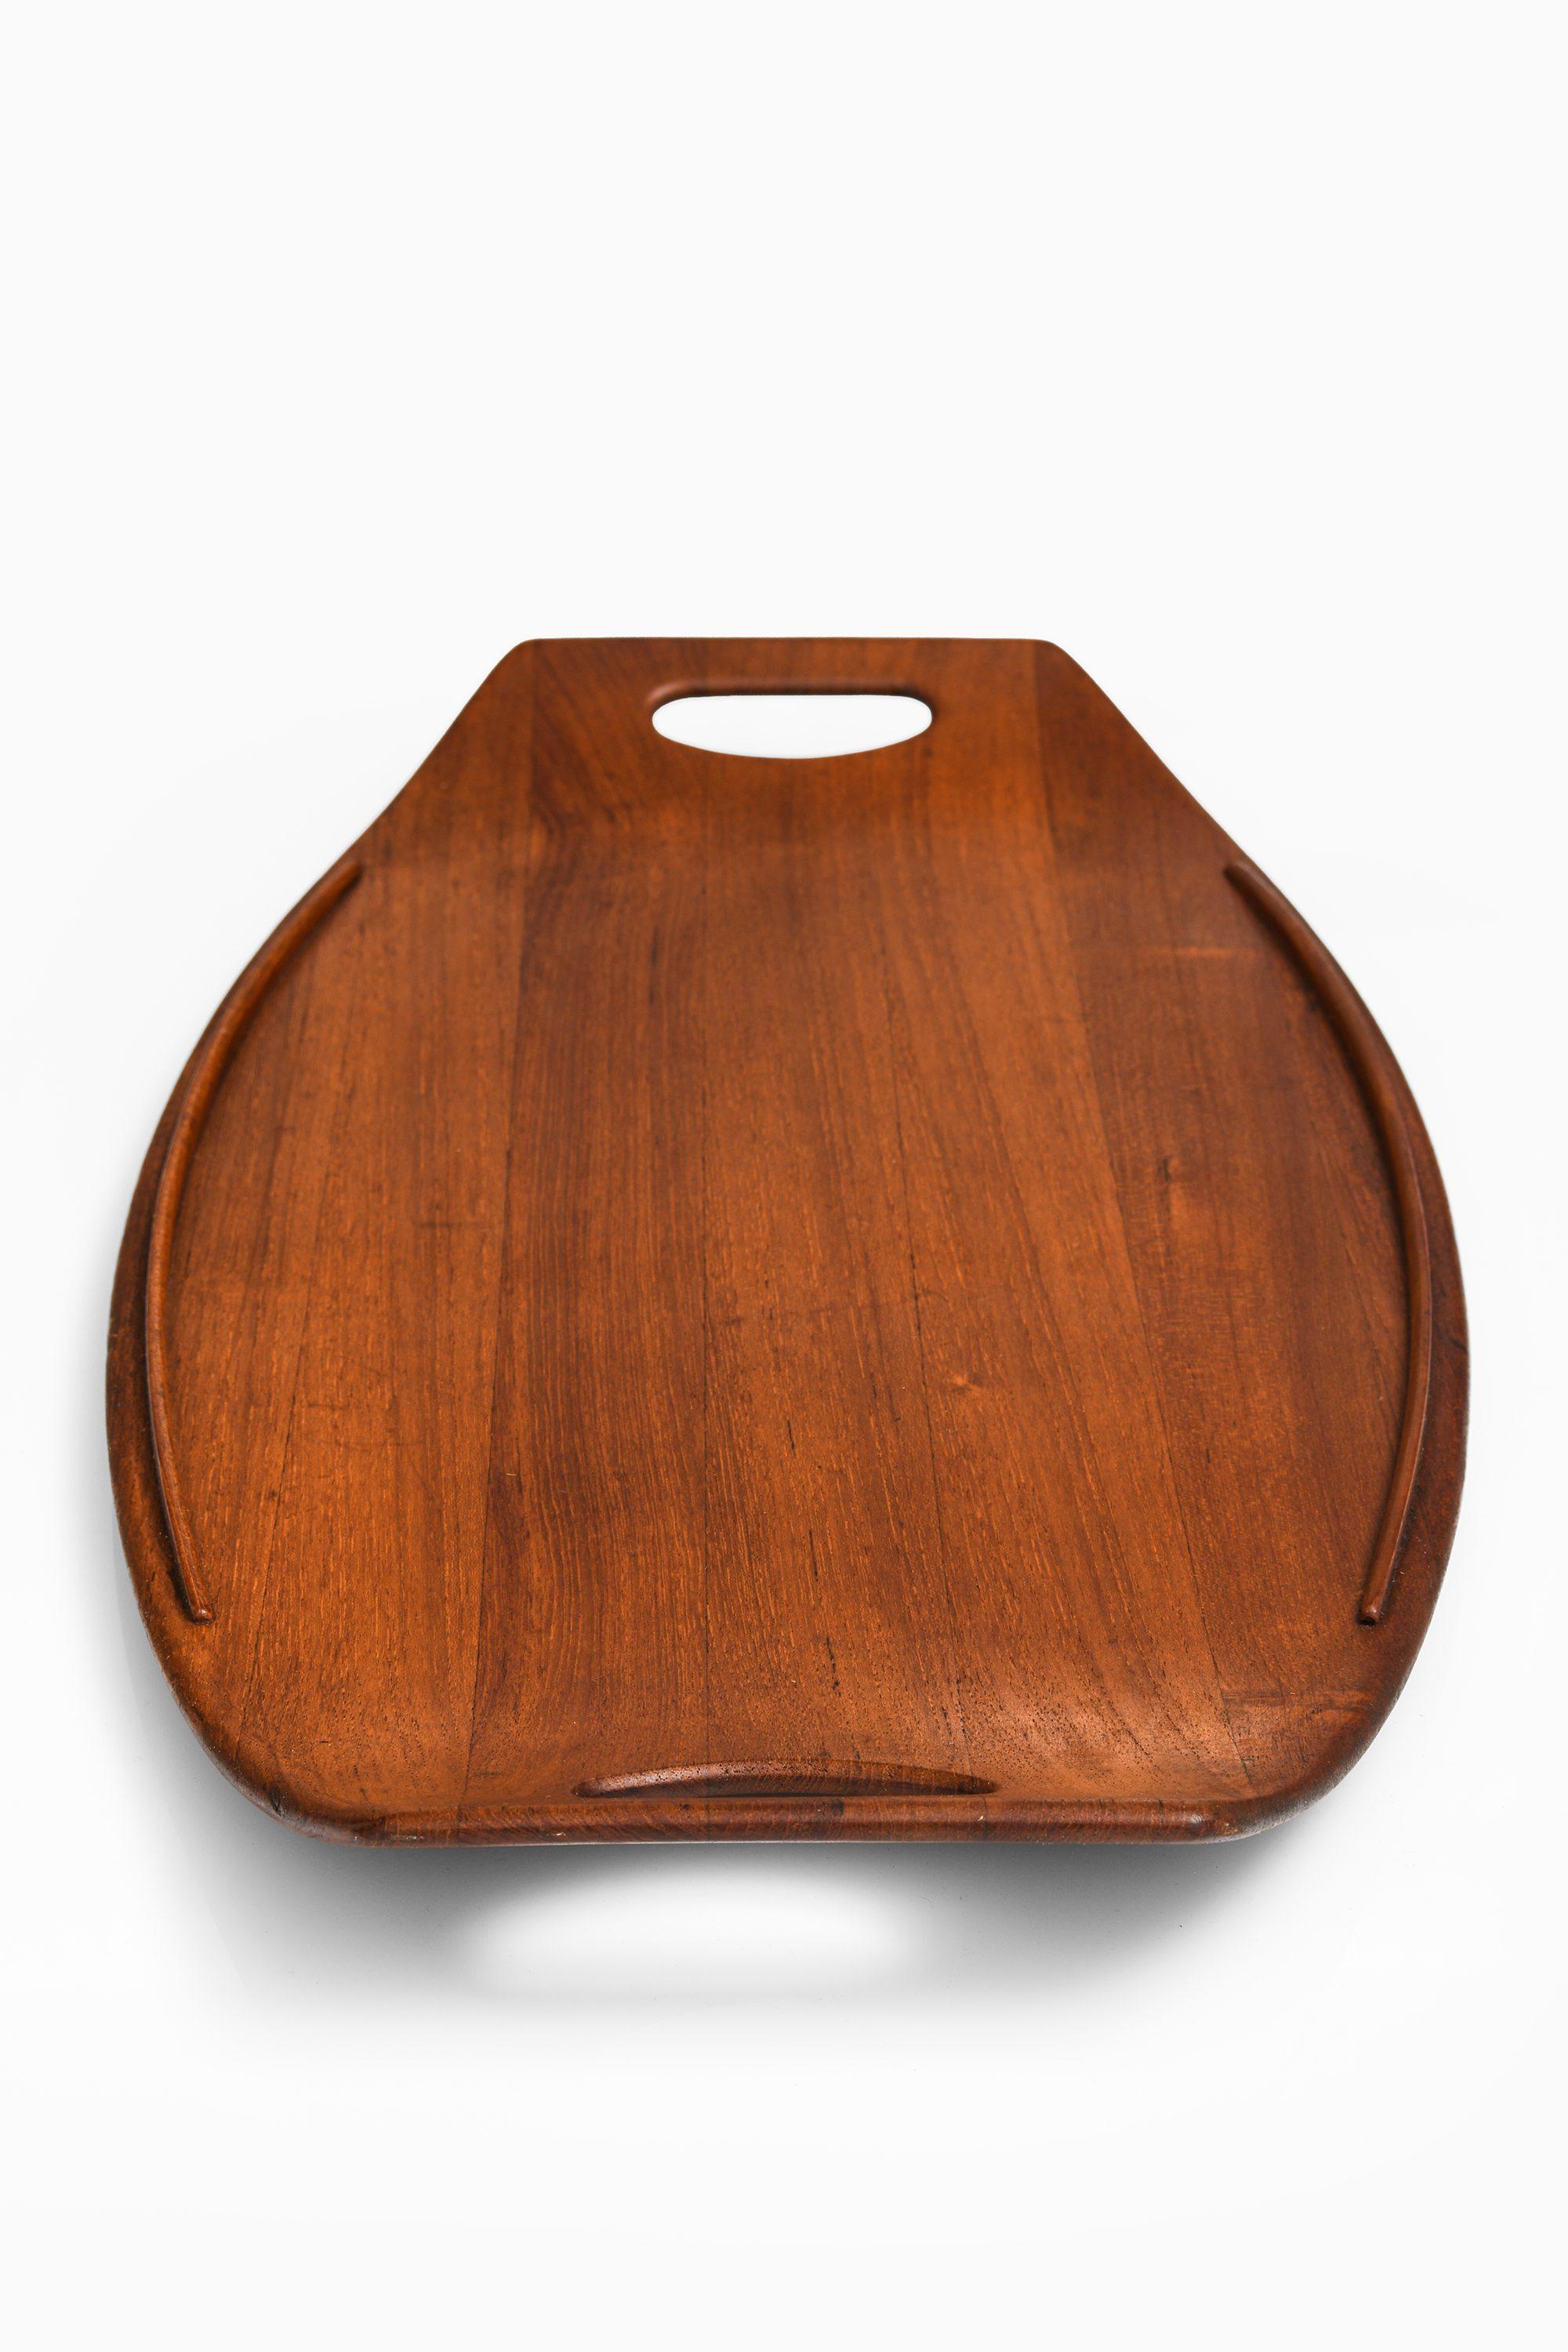 Serving Tray in Teak by Jens Quistgaard, 1950's

Additional Information:
Material: Teak
Style: Scandinavian, Mid century
Produced by Dansk in Denmark
Dimensions: (W x D x H): 68 x 32 x 4 cm
Condition: Good vintage condition, with small signs of usage